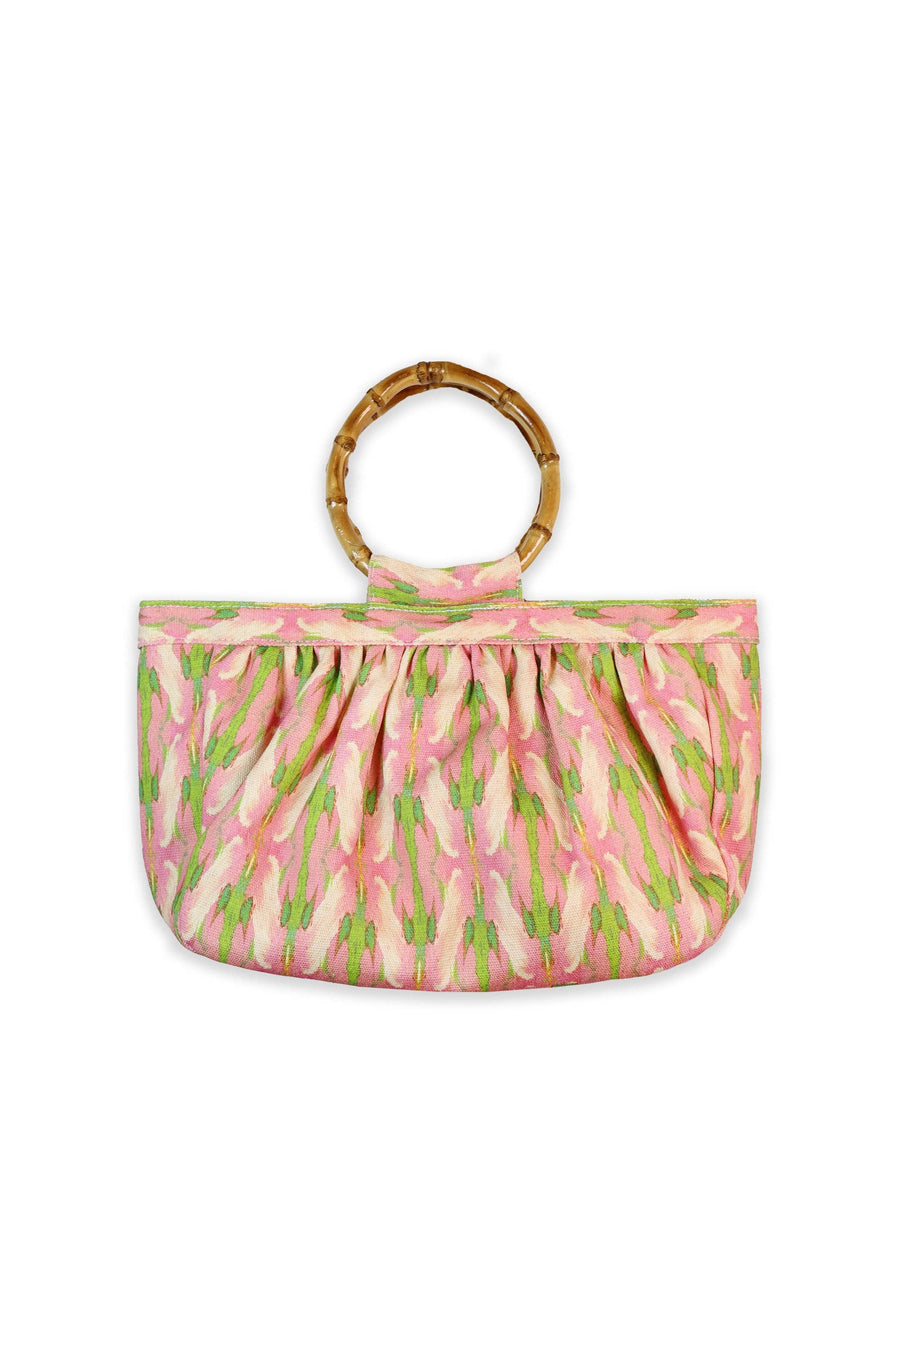 Bow Bag in Cabana Pink by Brooks Avenue